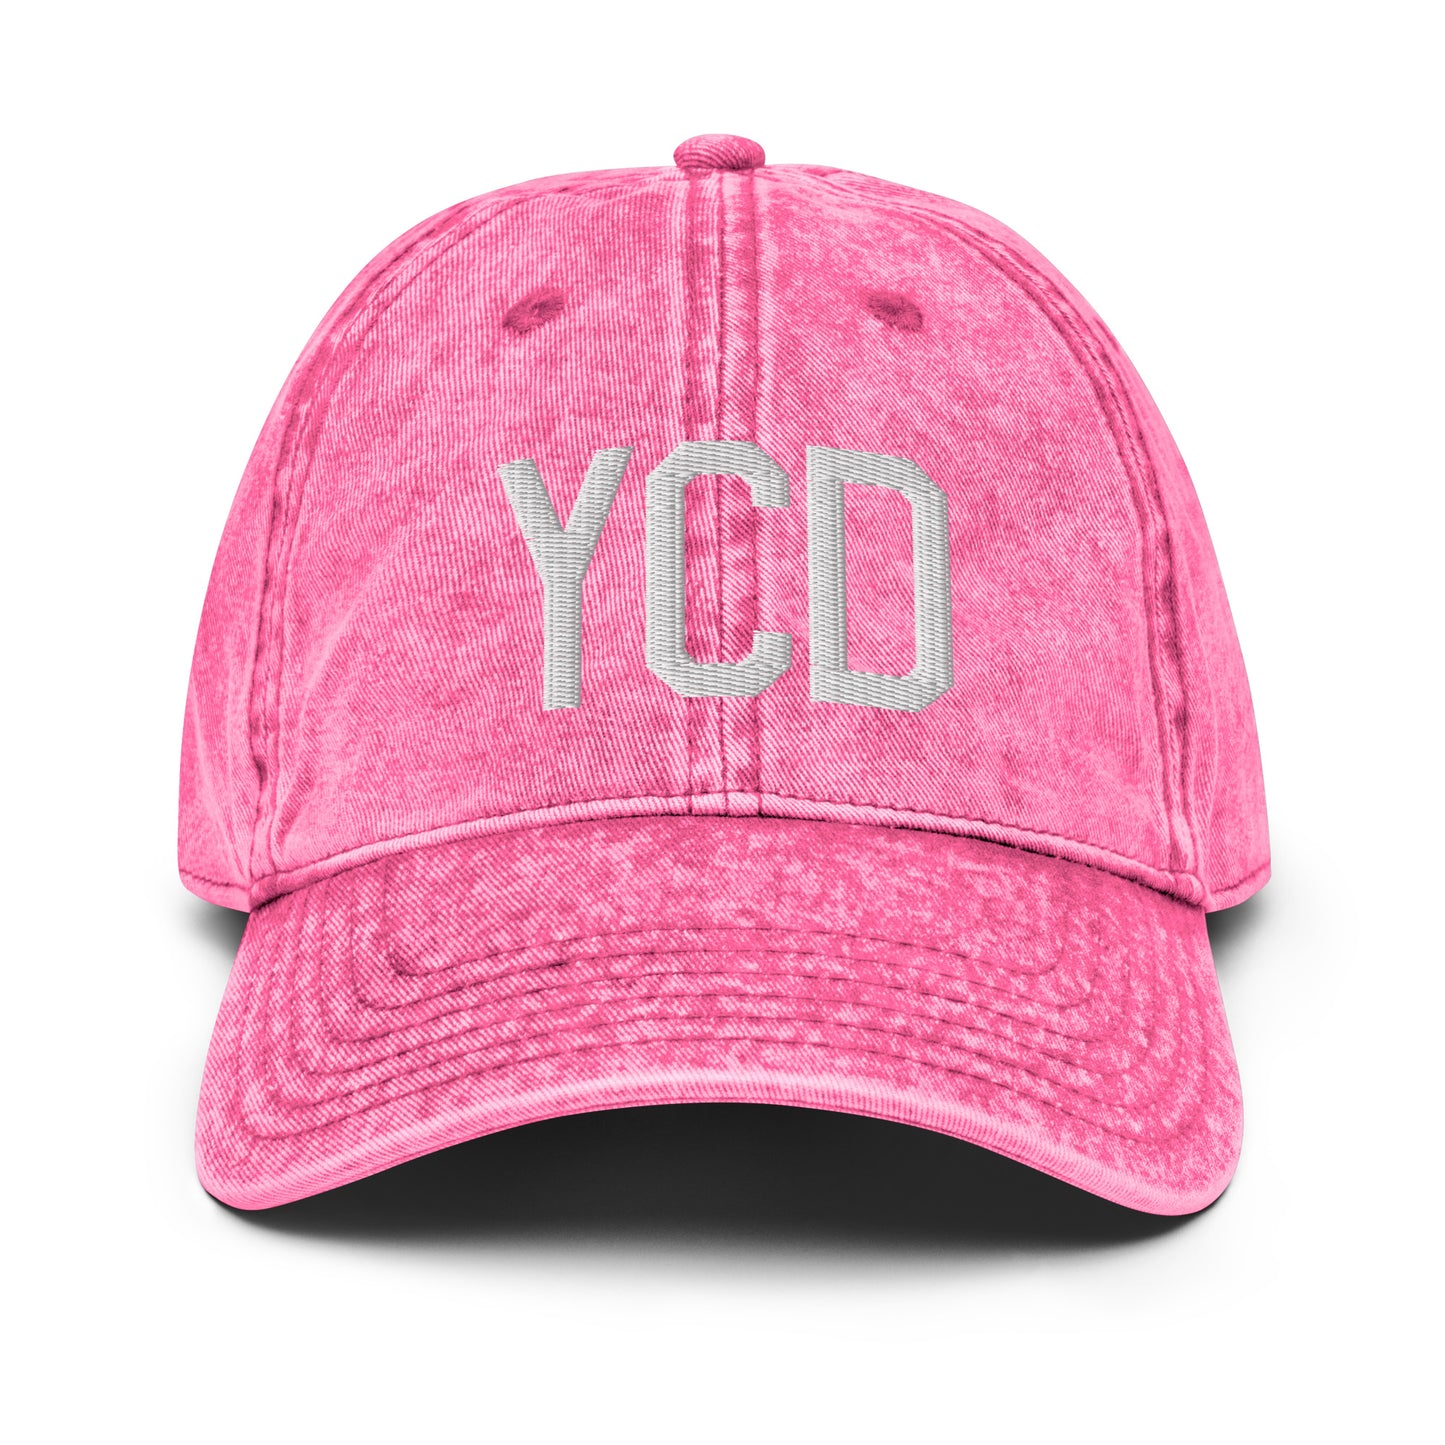 Airport Code Twill Cap - White • YCD Nanaimo • YHM Designs - Image 25